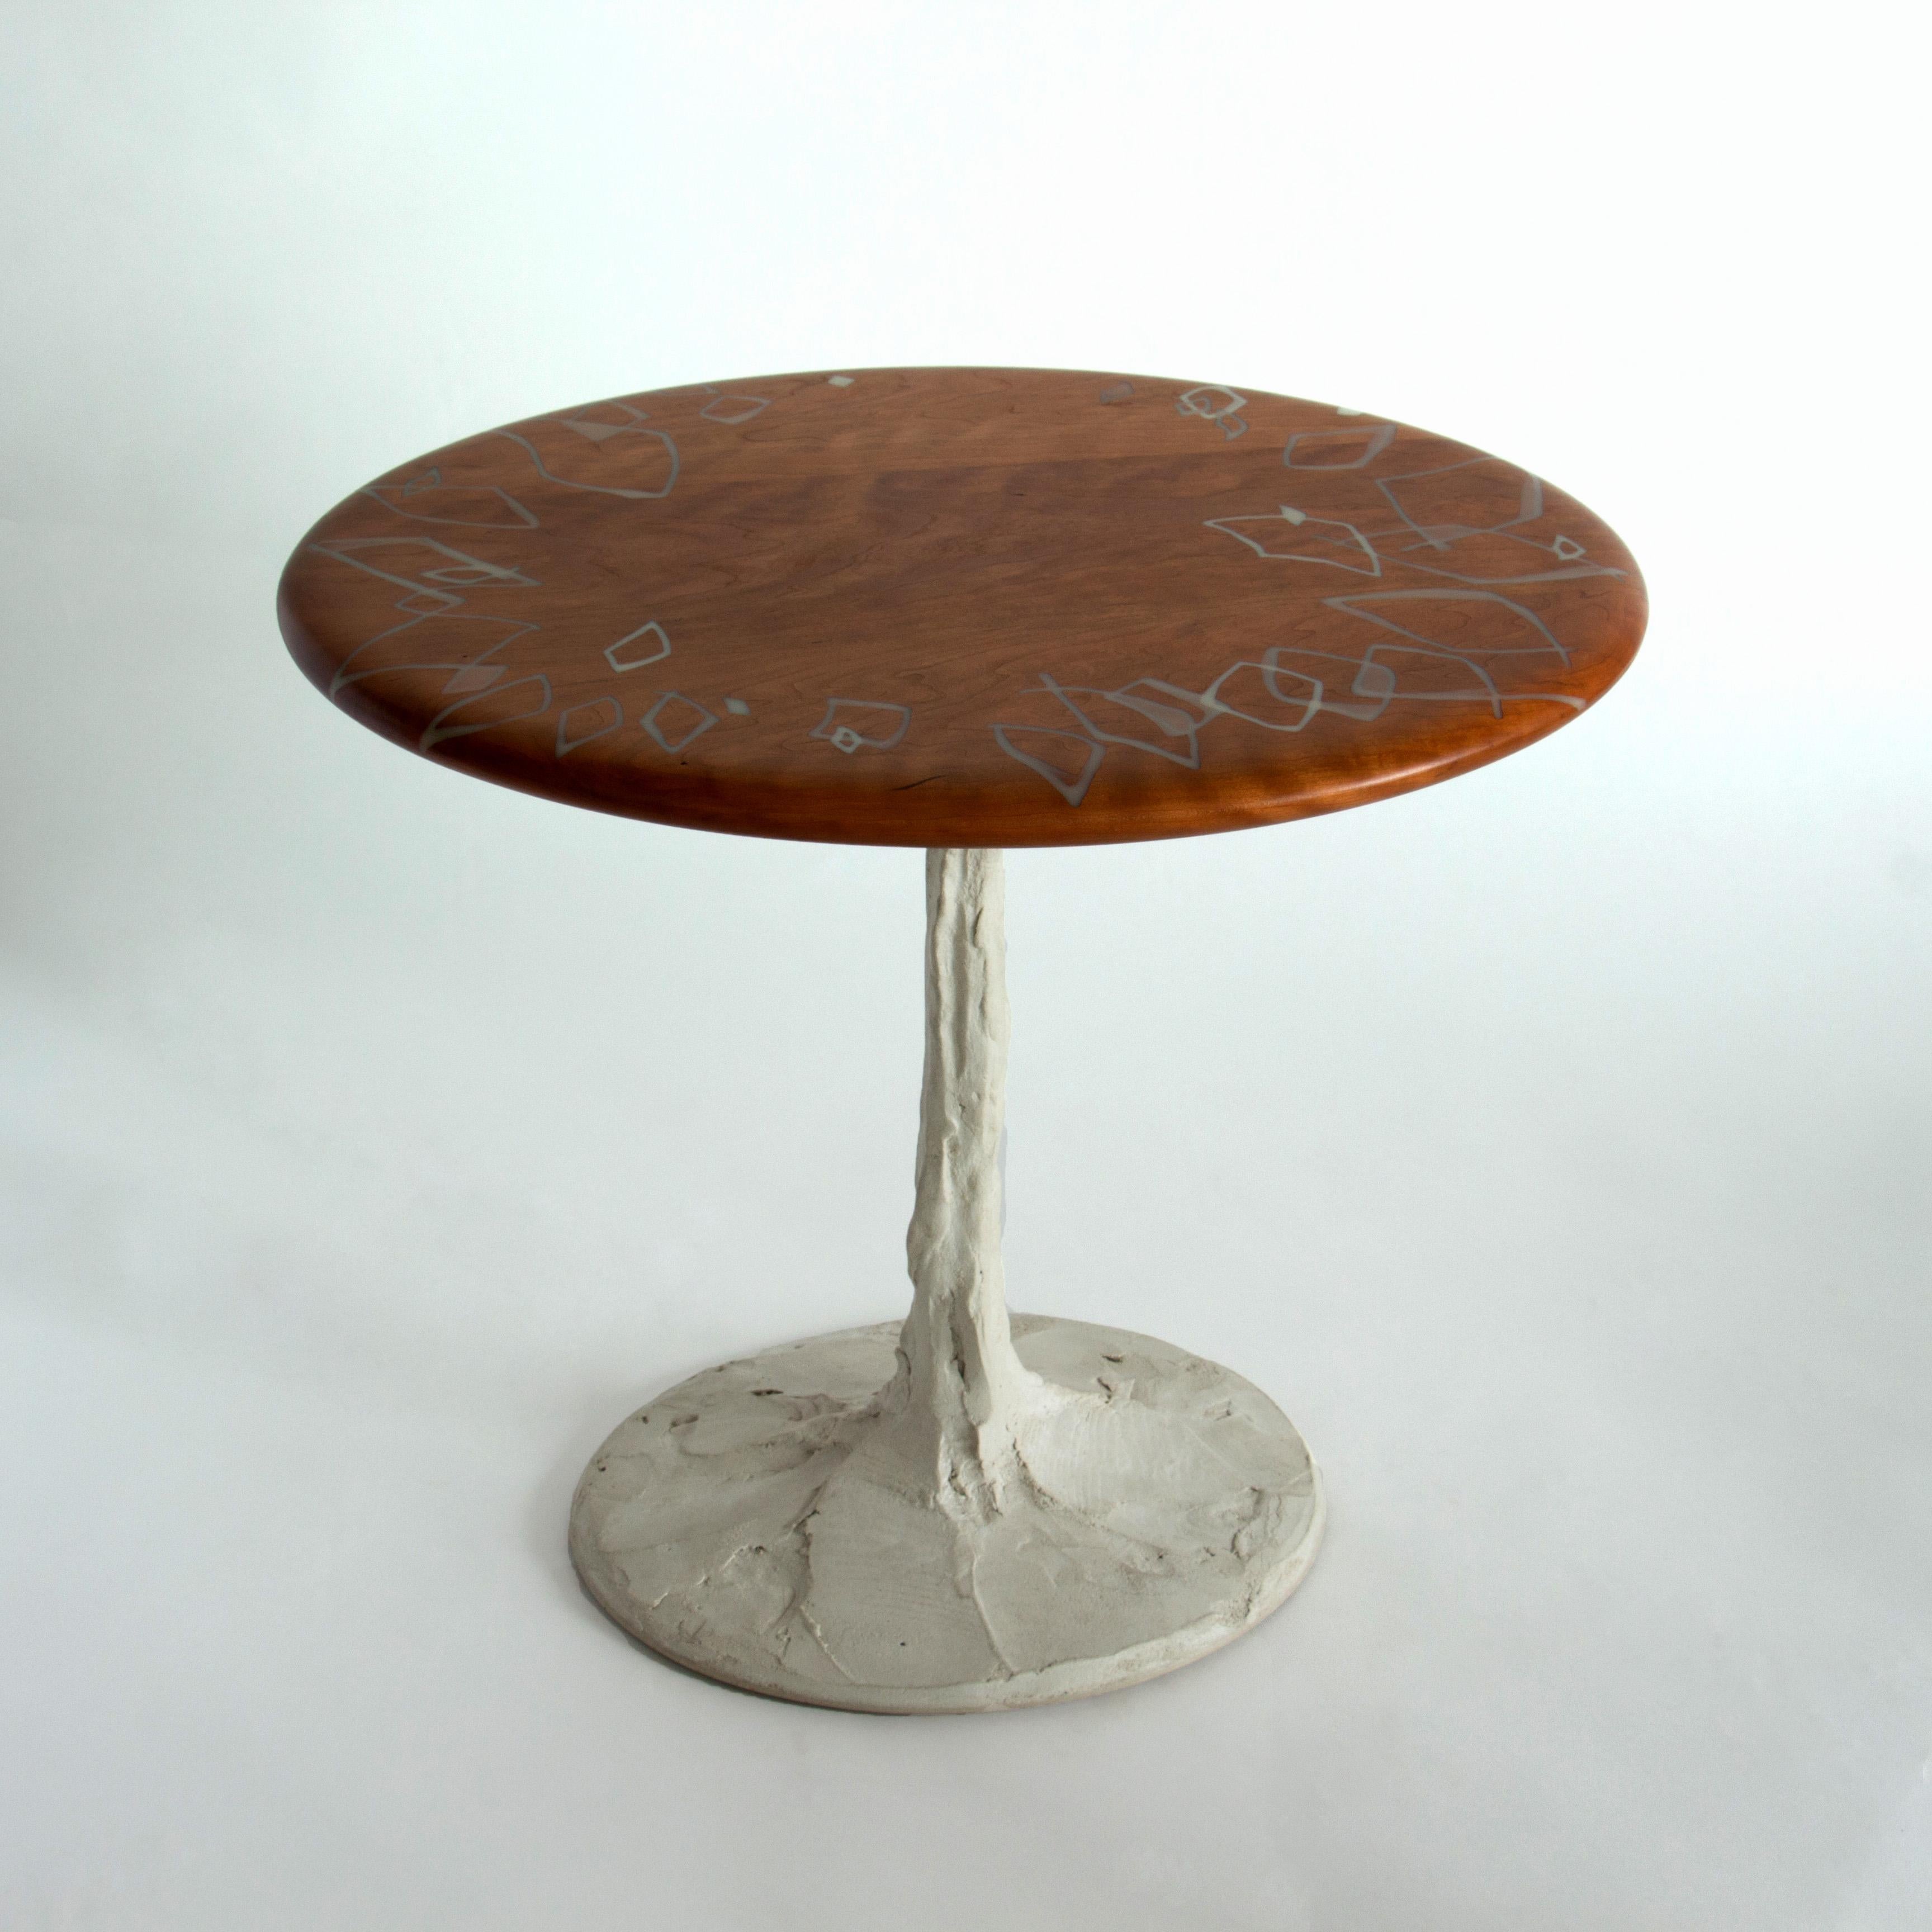 Carved Sky with Diamonds Side Table in Cherry with Concrete Pedestal Base - IN STOCK For Sale